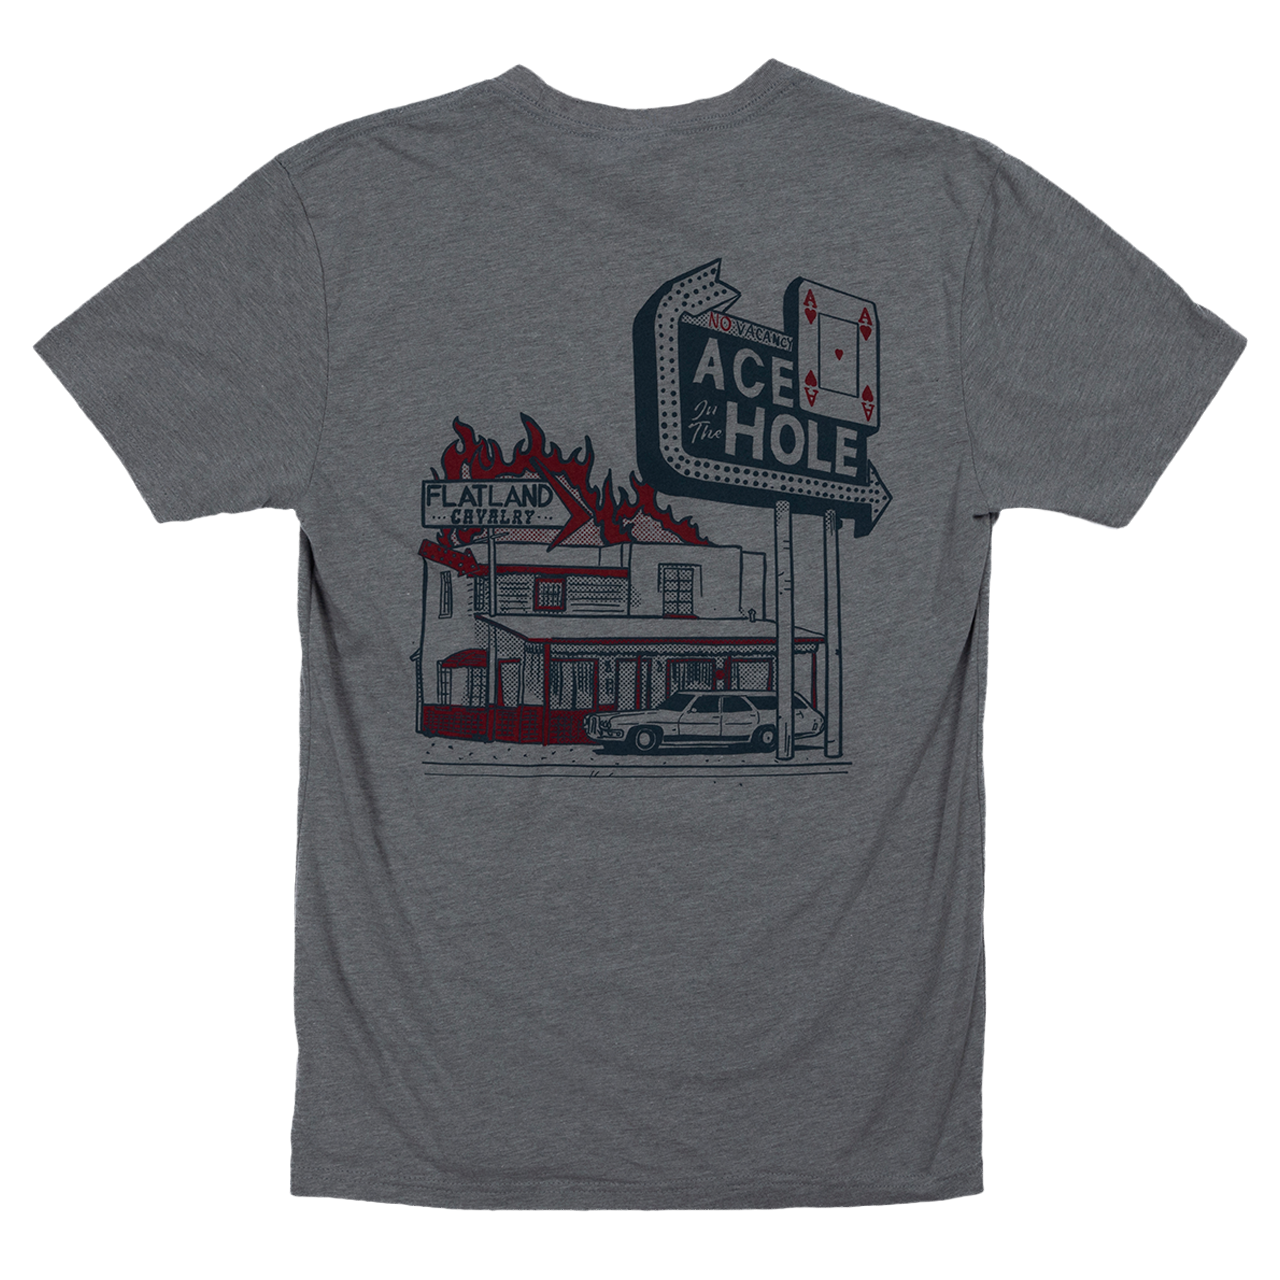 Ace In the Hole Tee